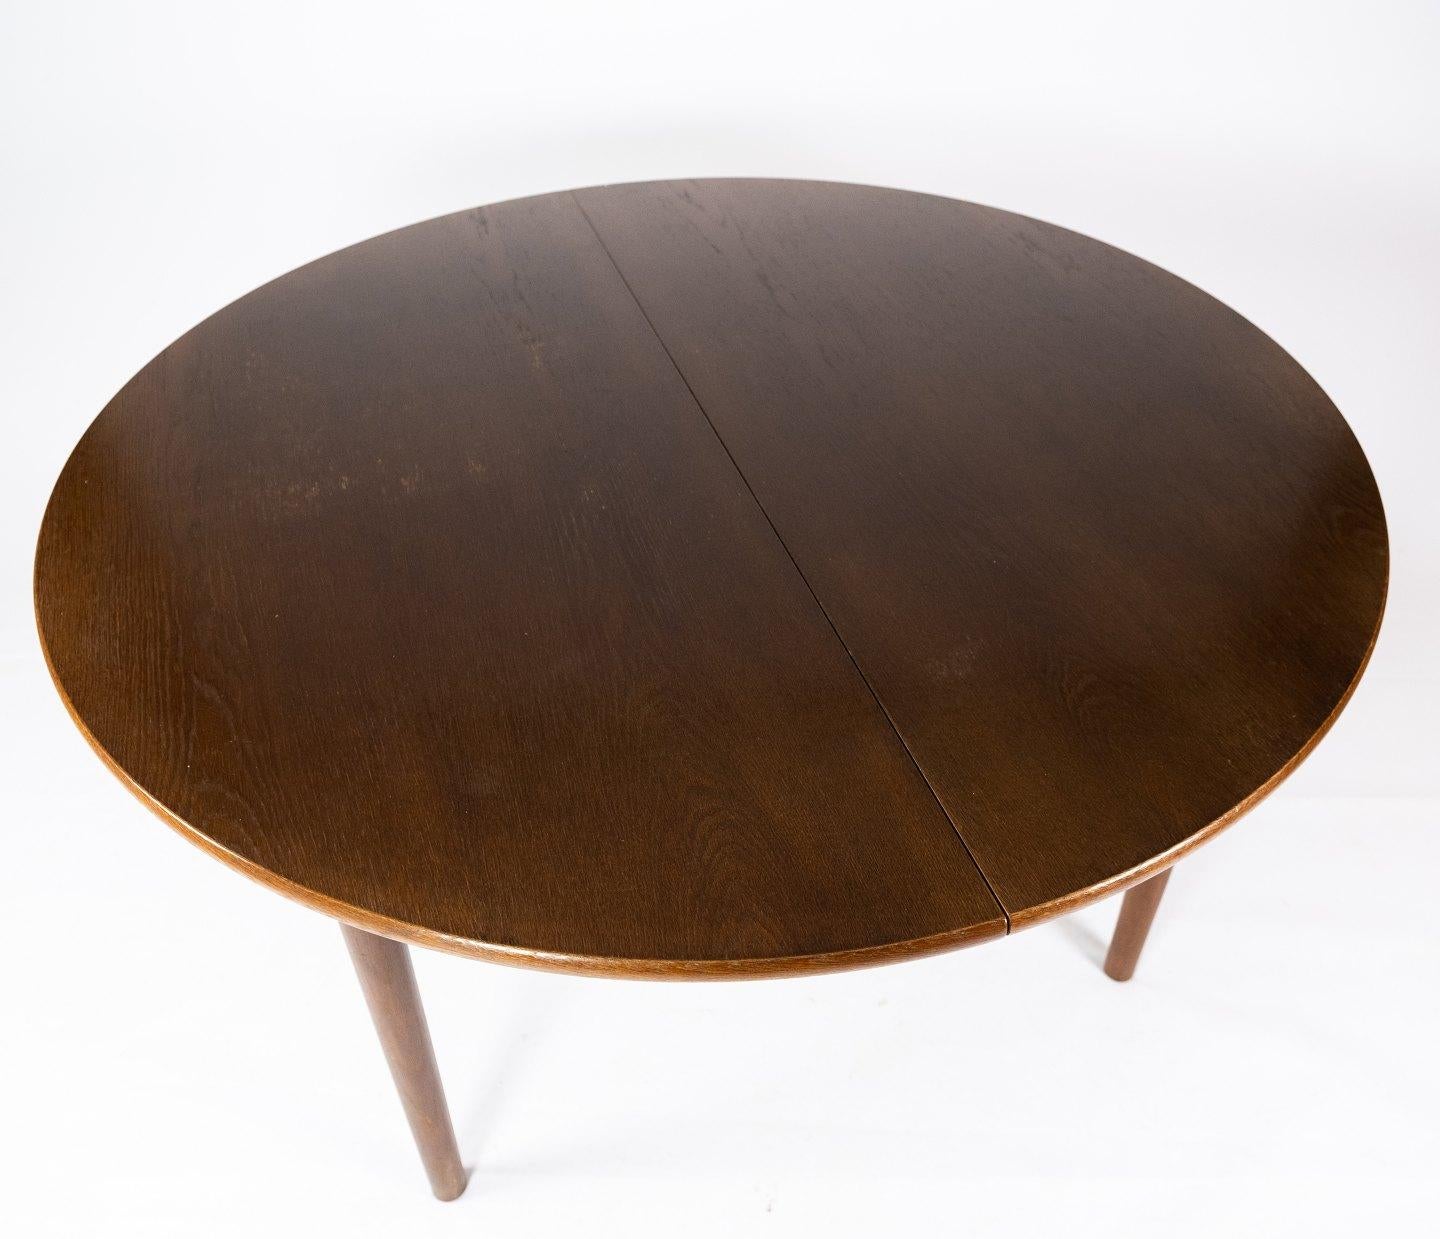 Mid-20th Century Dining Table Made In Dark Oak, Danish Design From 1960s For Sale